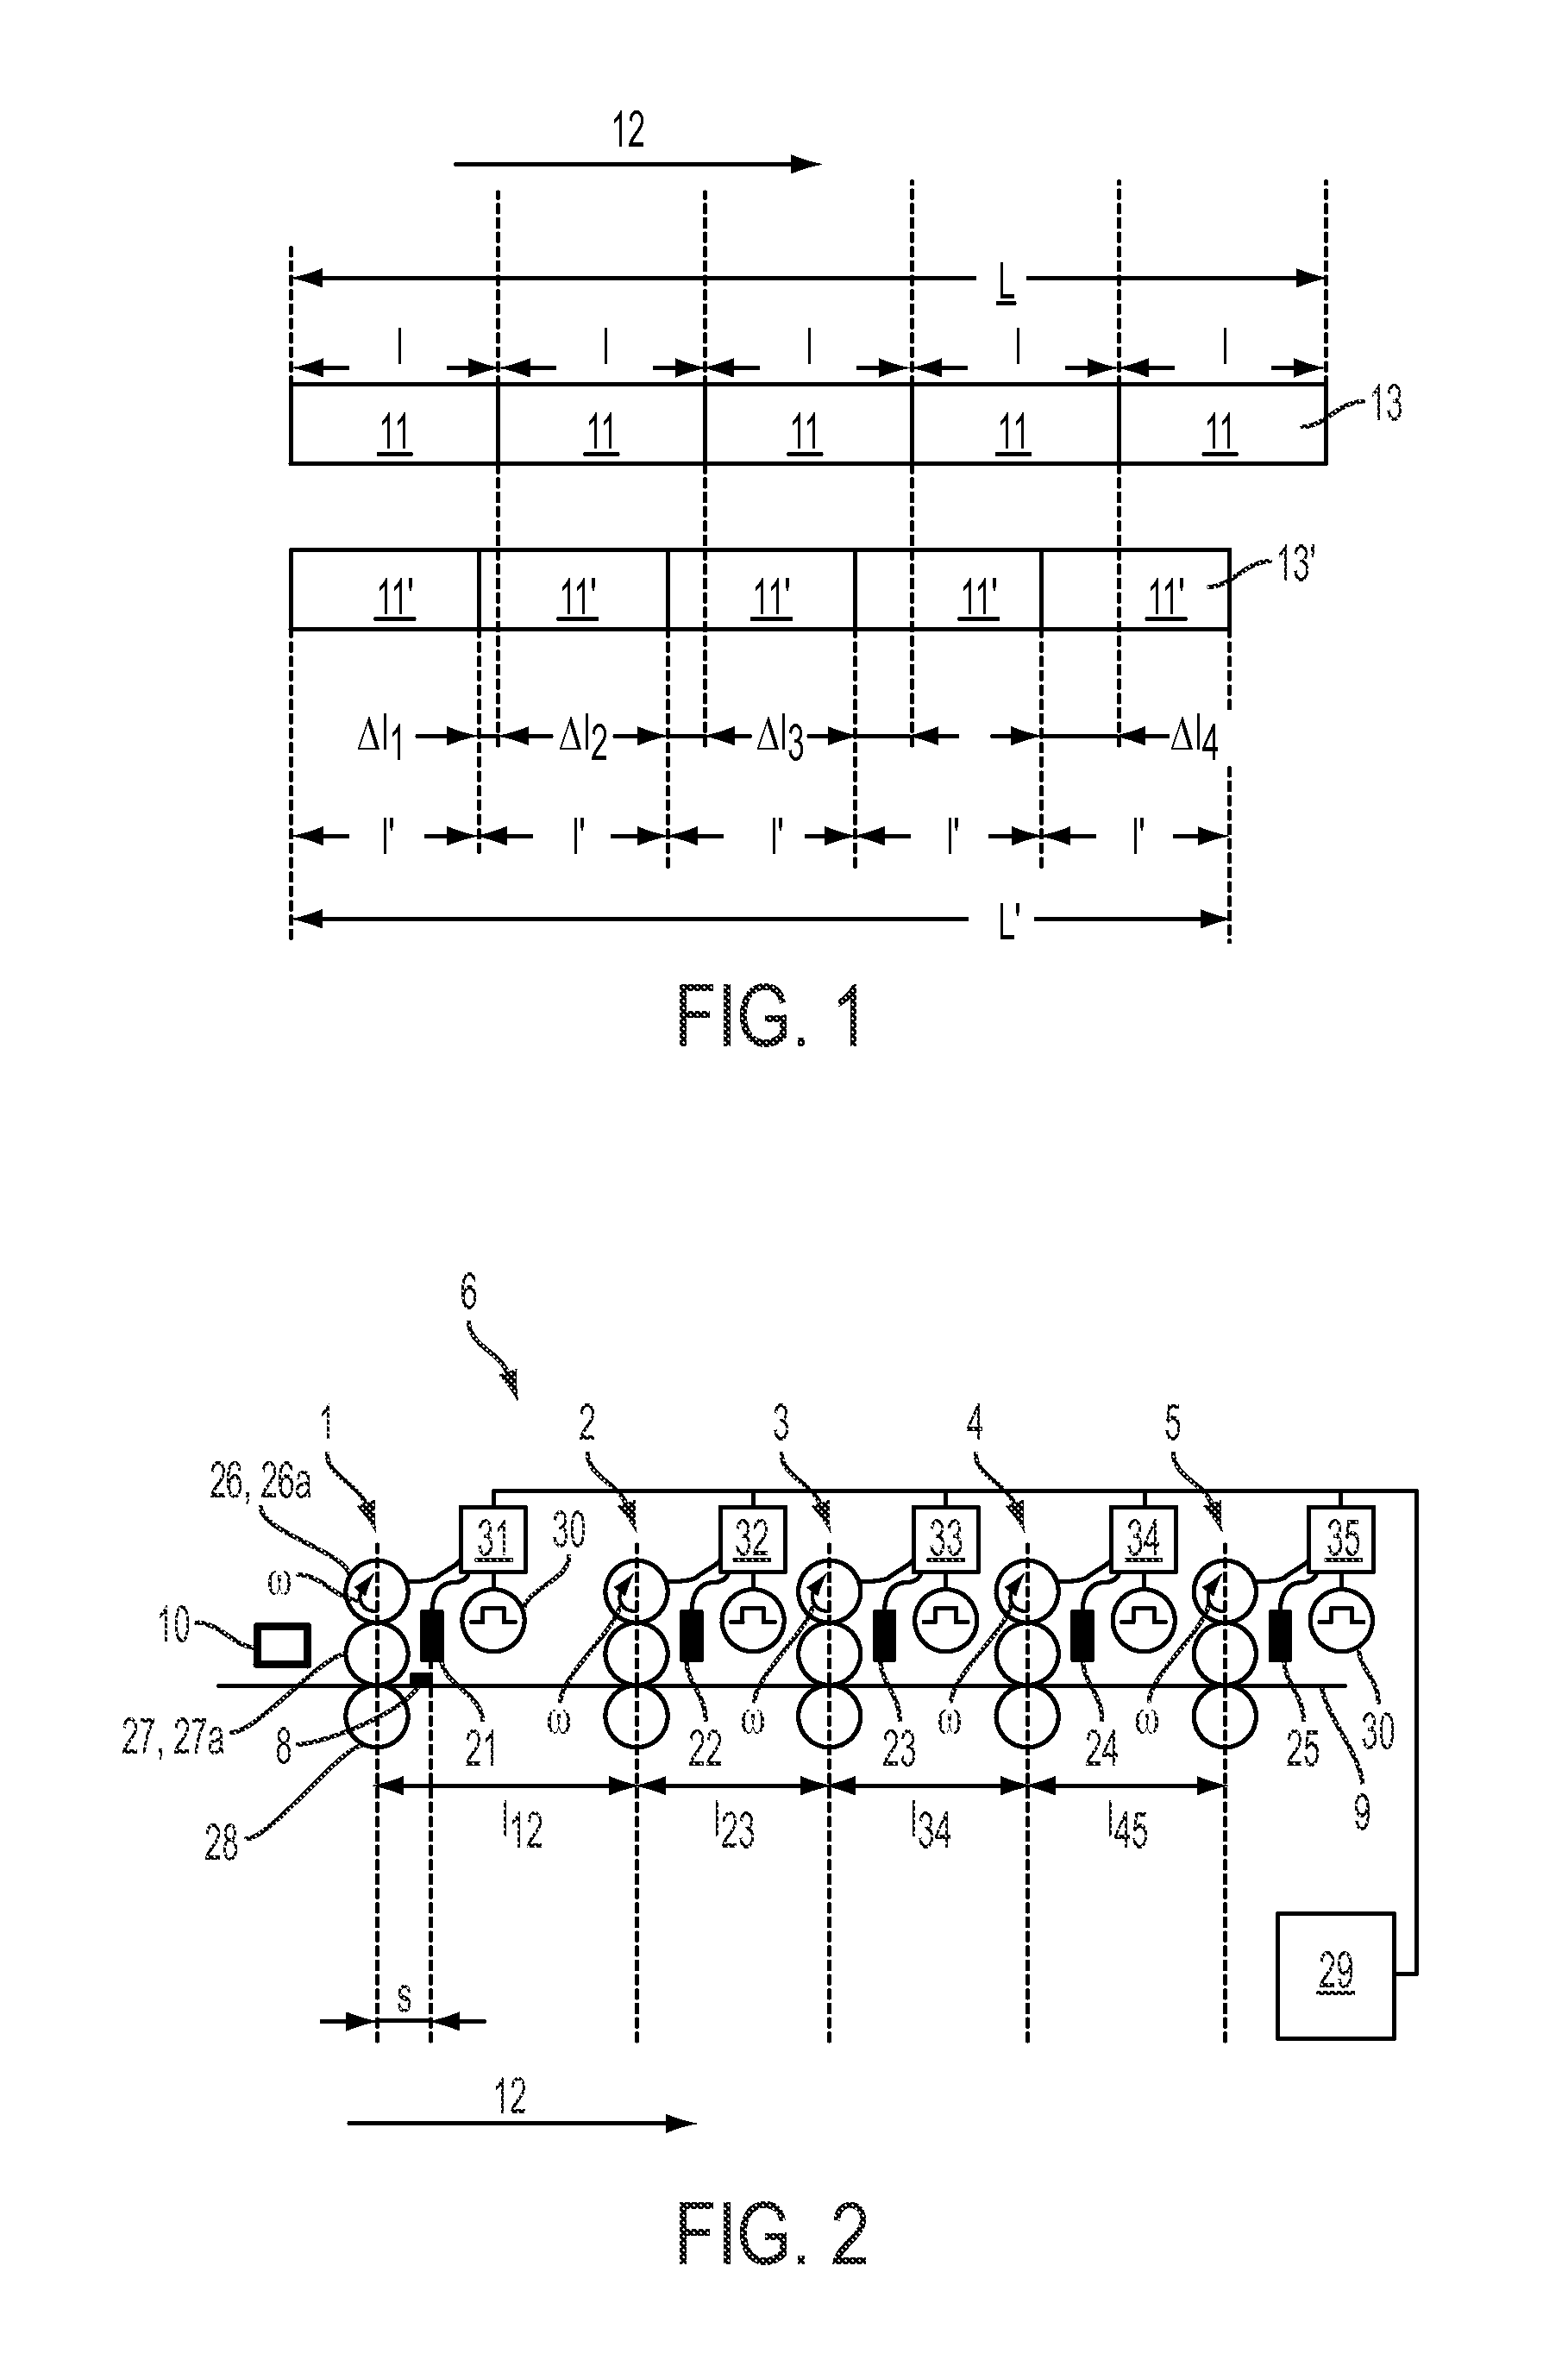 Method and device for controlling the register settings of a printing press